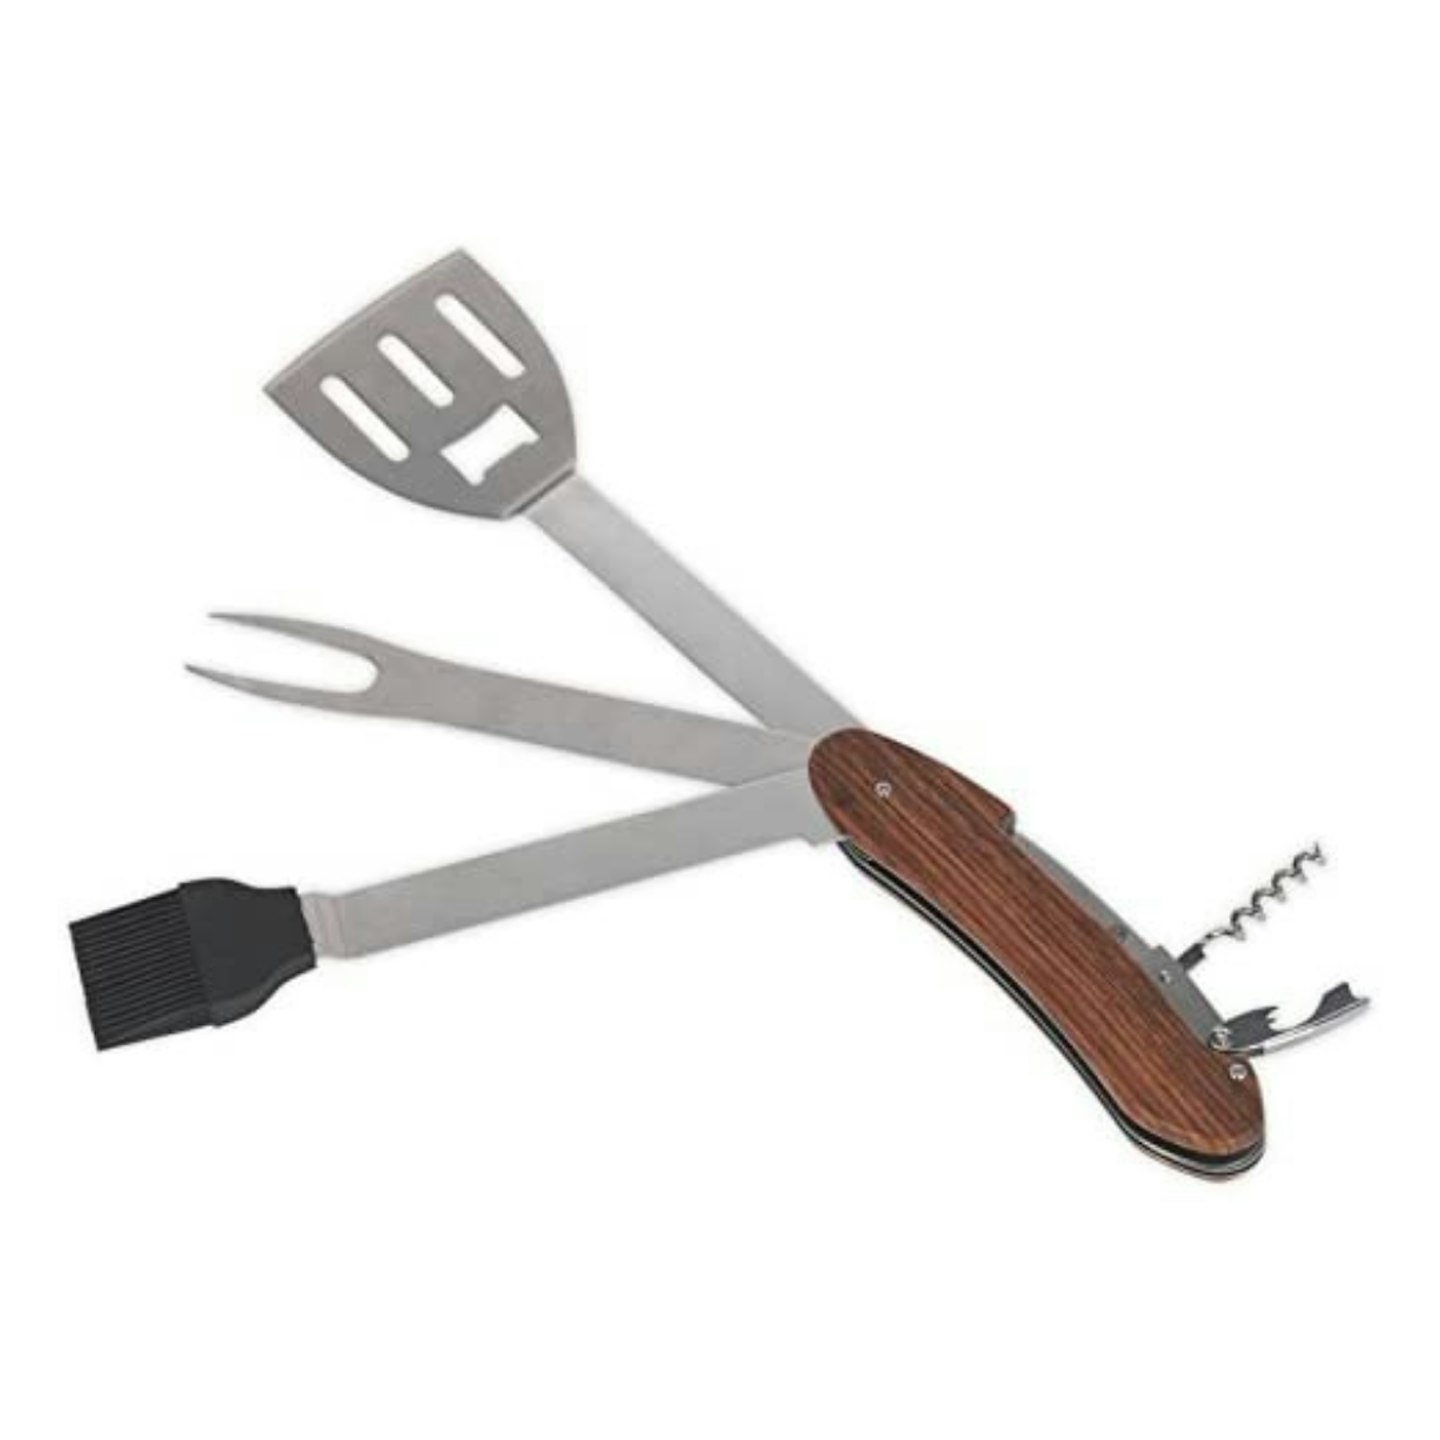 Sealey BBQ13 Barbecue Multi-Tool 5 Function